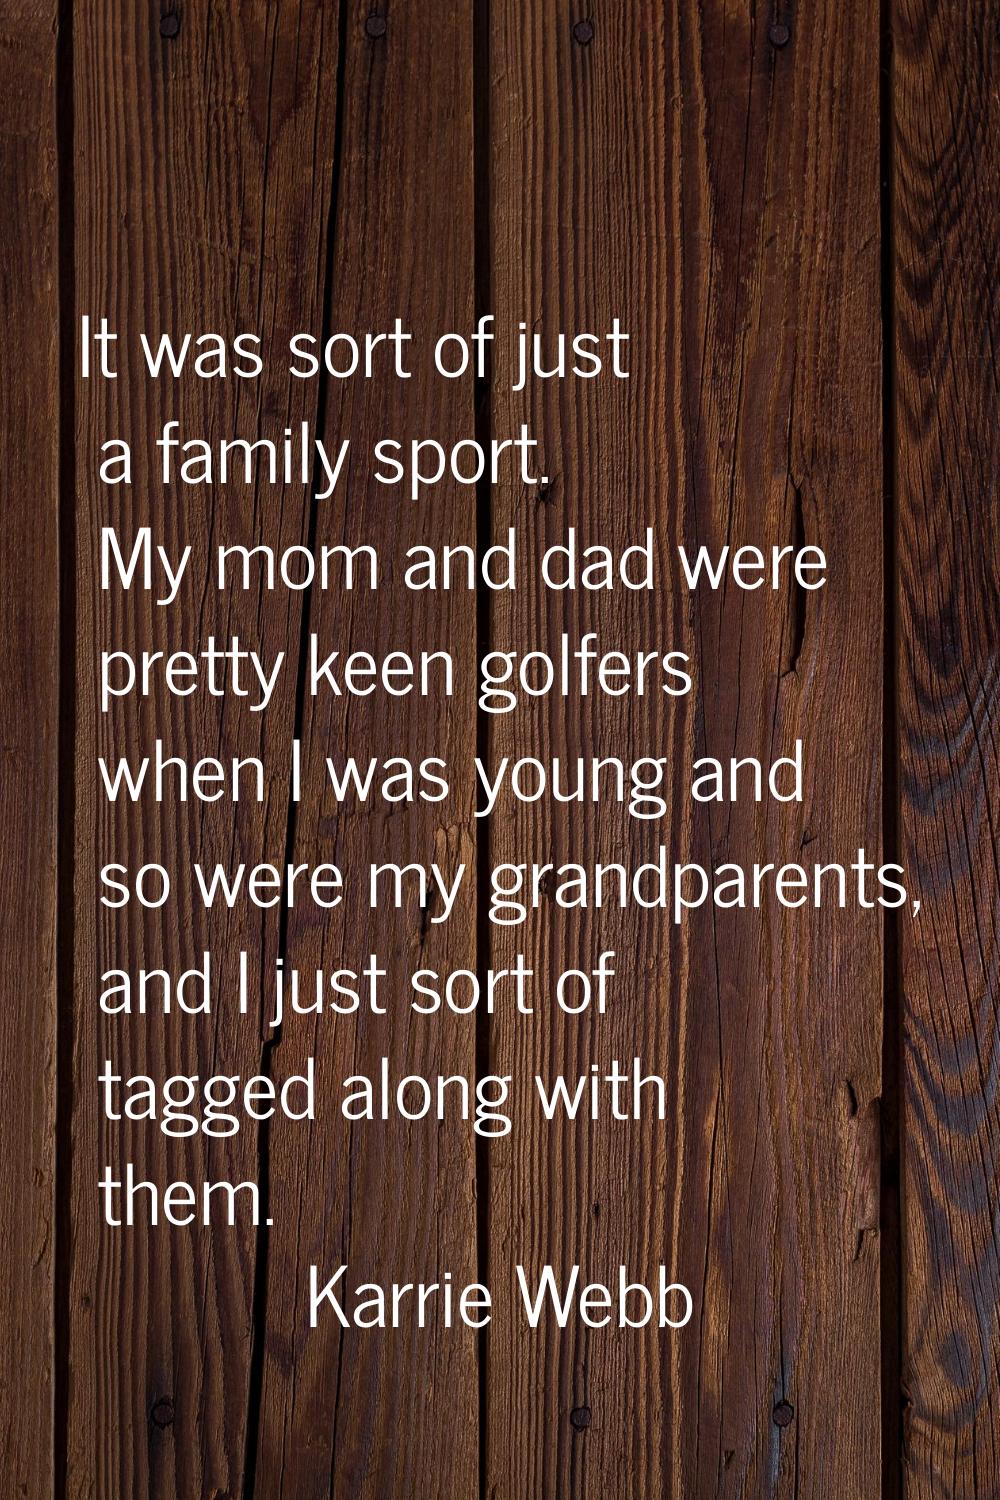 It was sort of just a family sport. My mom and dad were pretty keen golfers when I was young and so